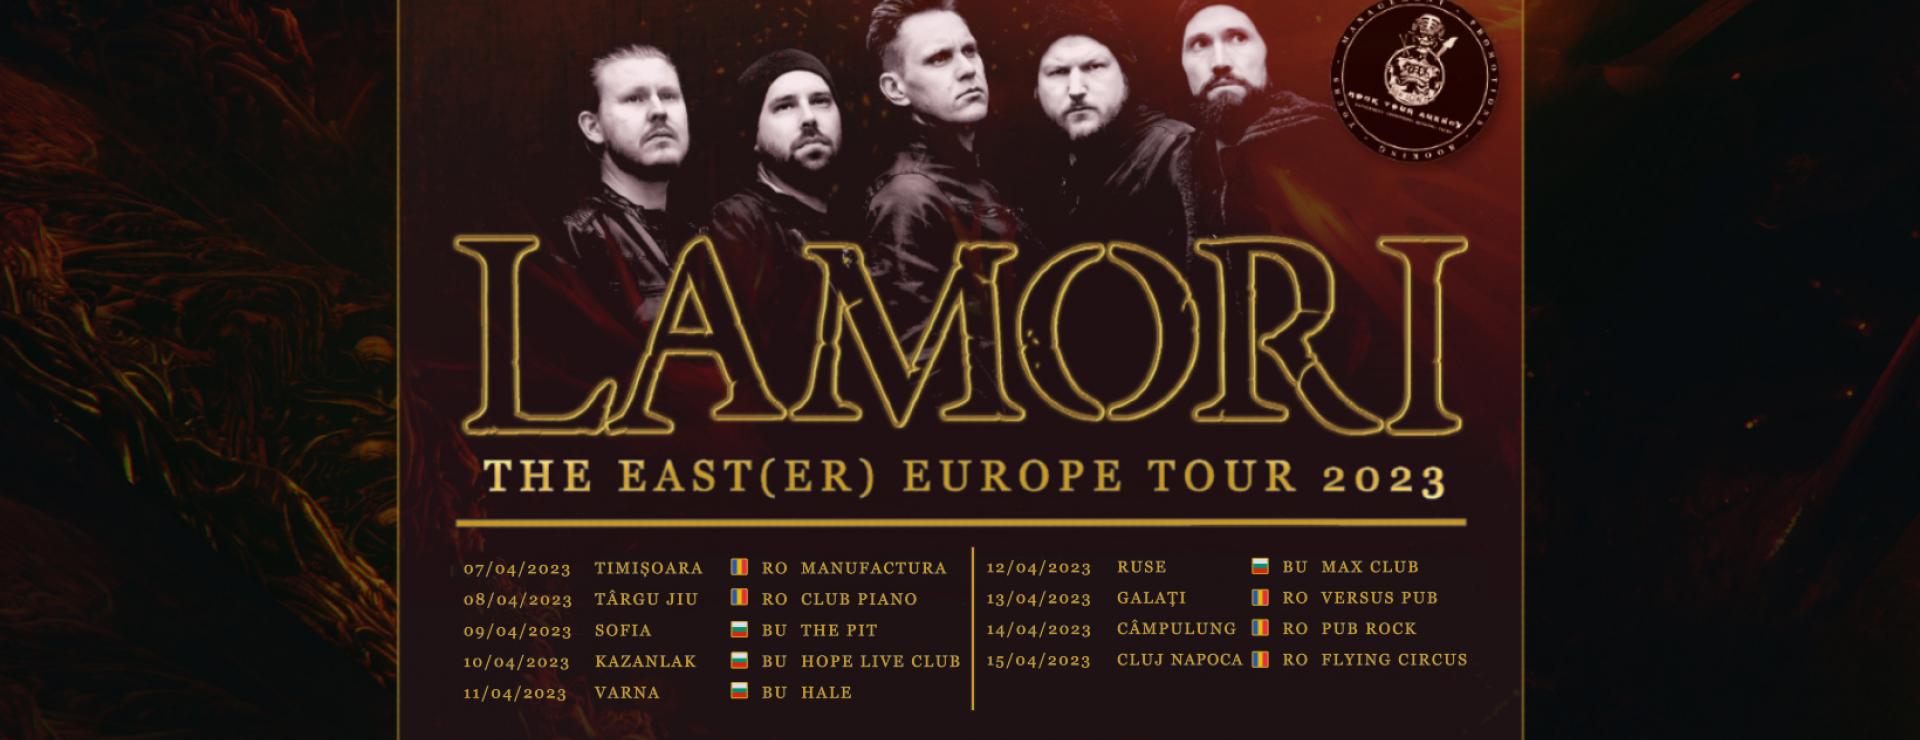 THE EASTER EUROPE TOUR 2023